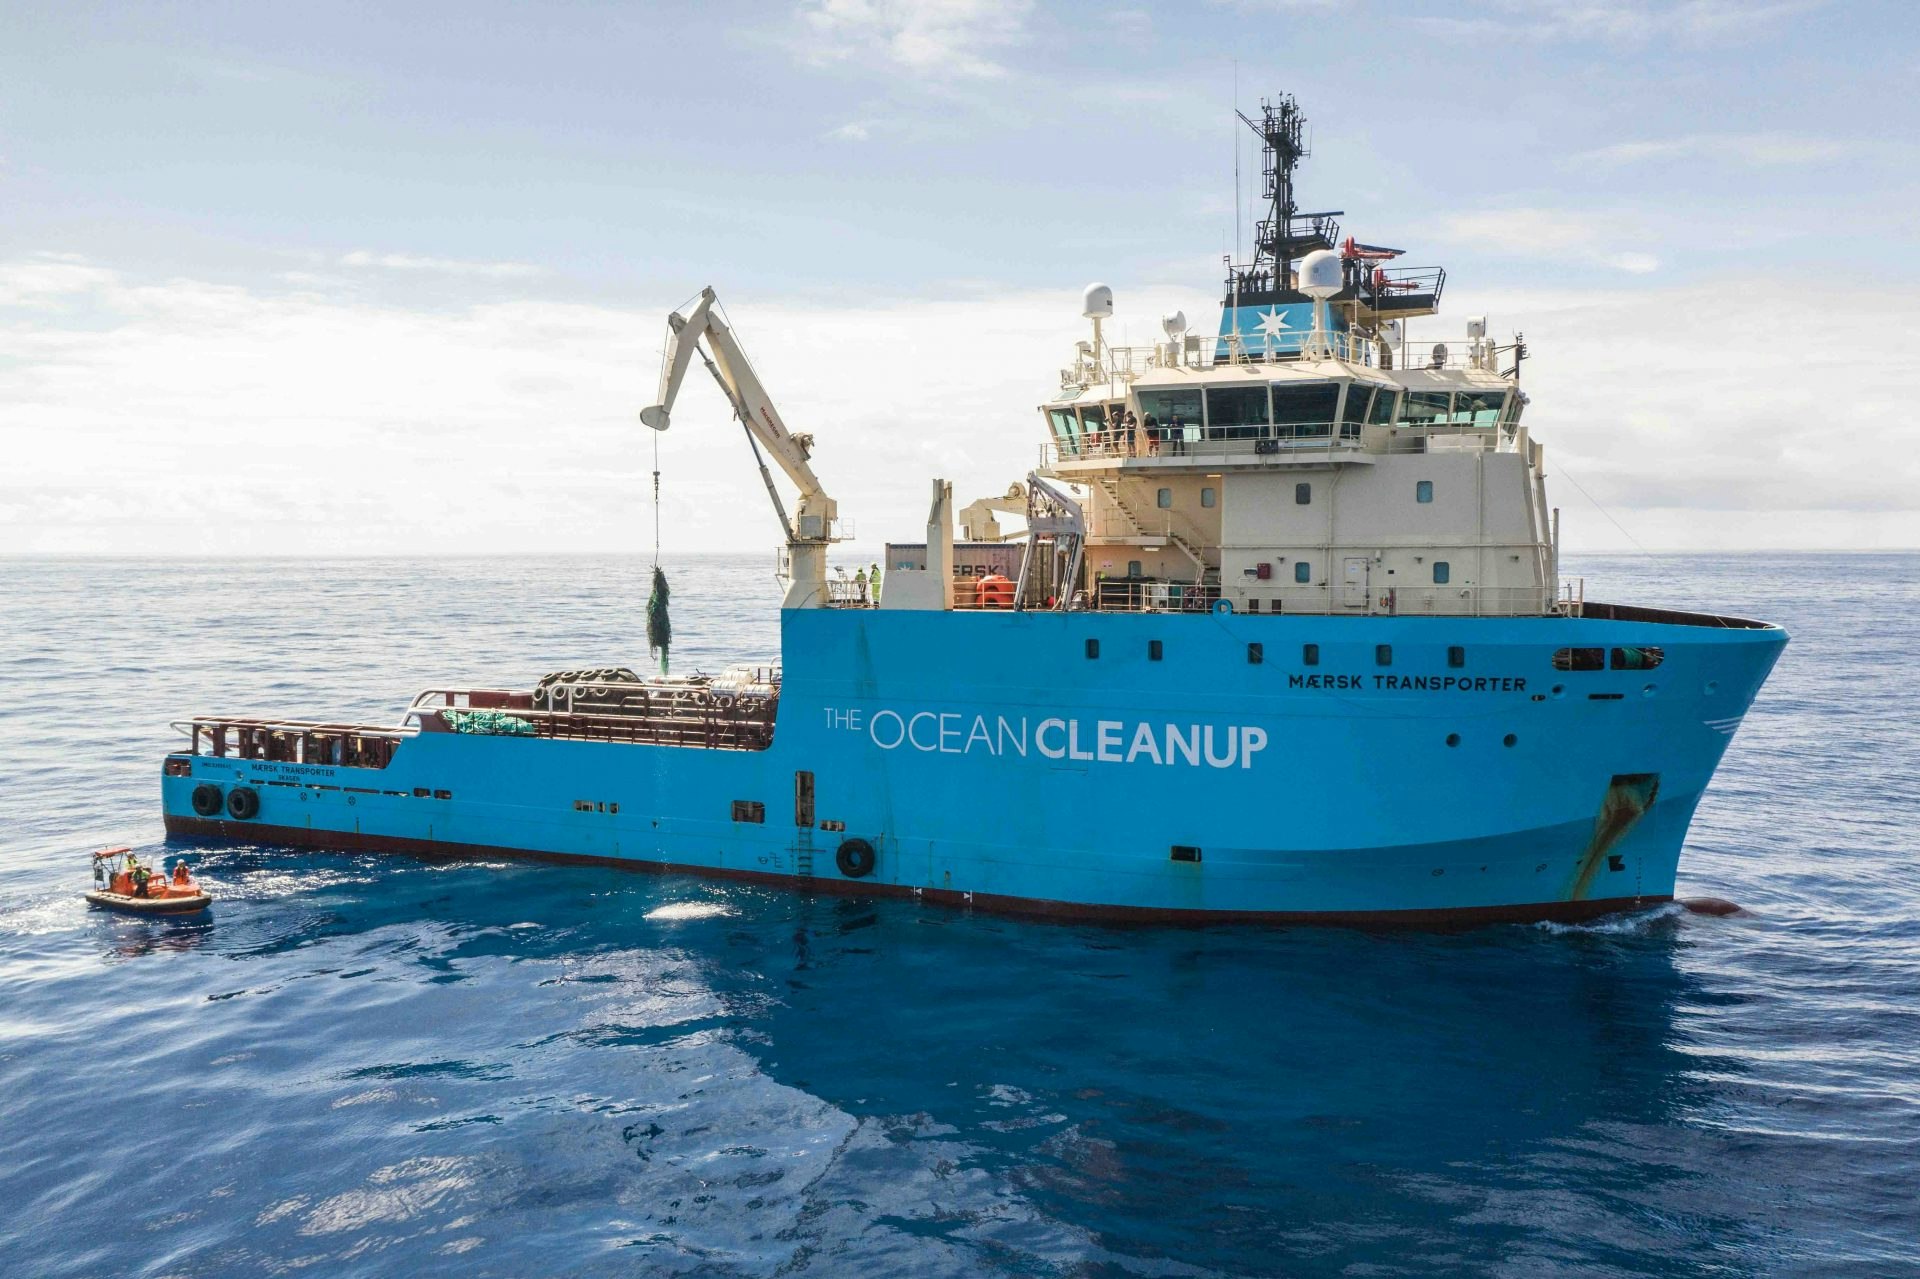 The Ocean Cleanup ship in action.jpg